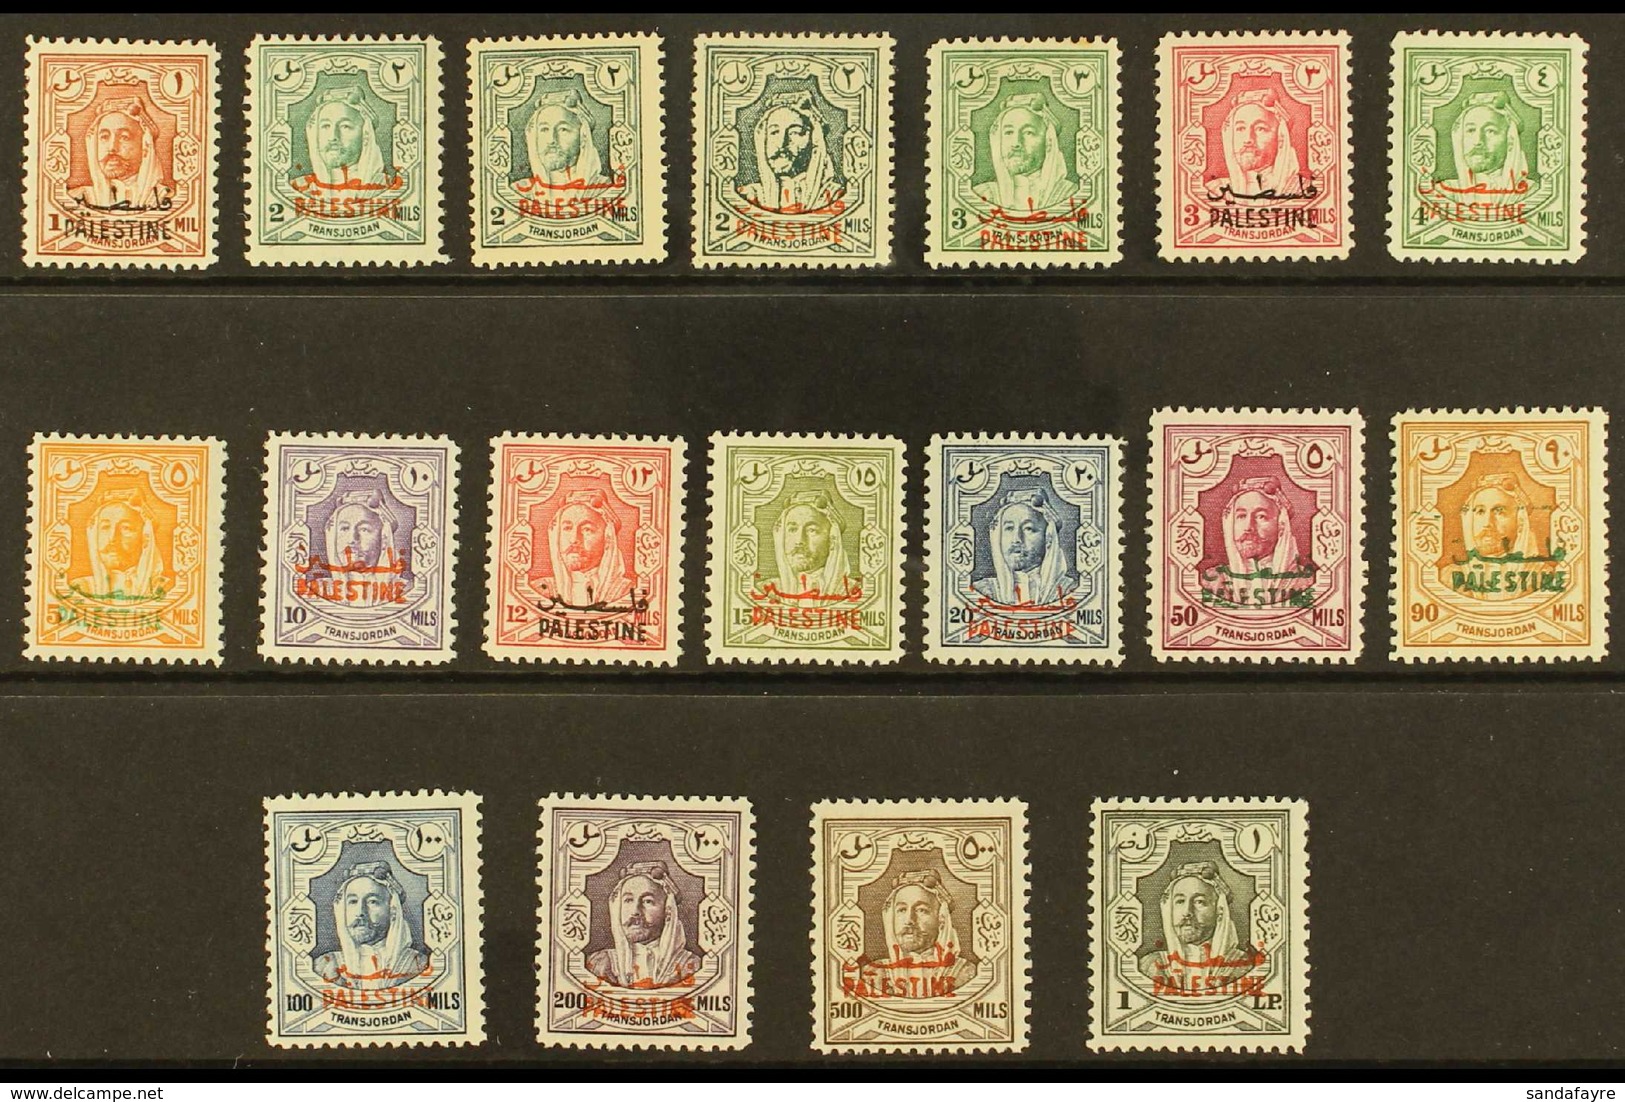 JORDANIAN OCCUPATION 1948 Overprints Complete Set Incl All Three Perf Types Of 2m, SG P1/16 & P2c/d, Very Fine Mint, Ver - Palestina